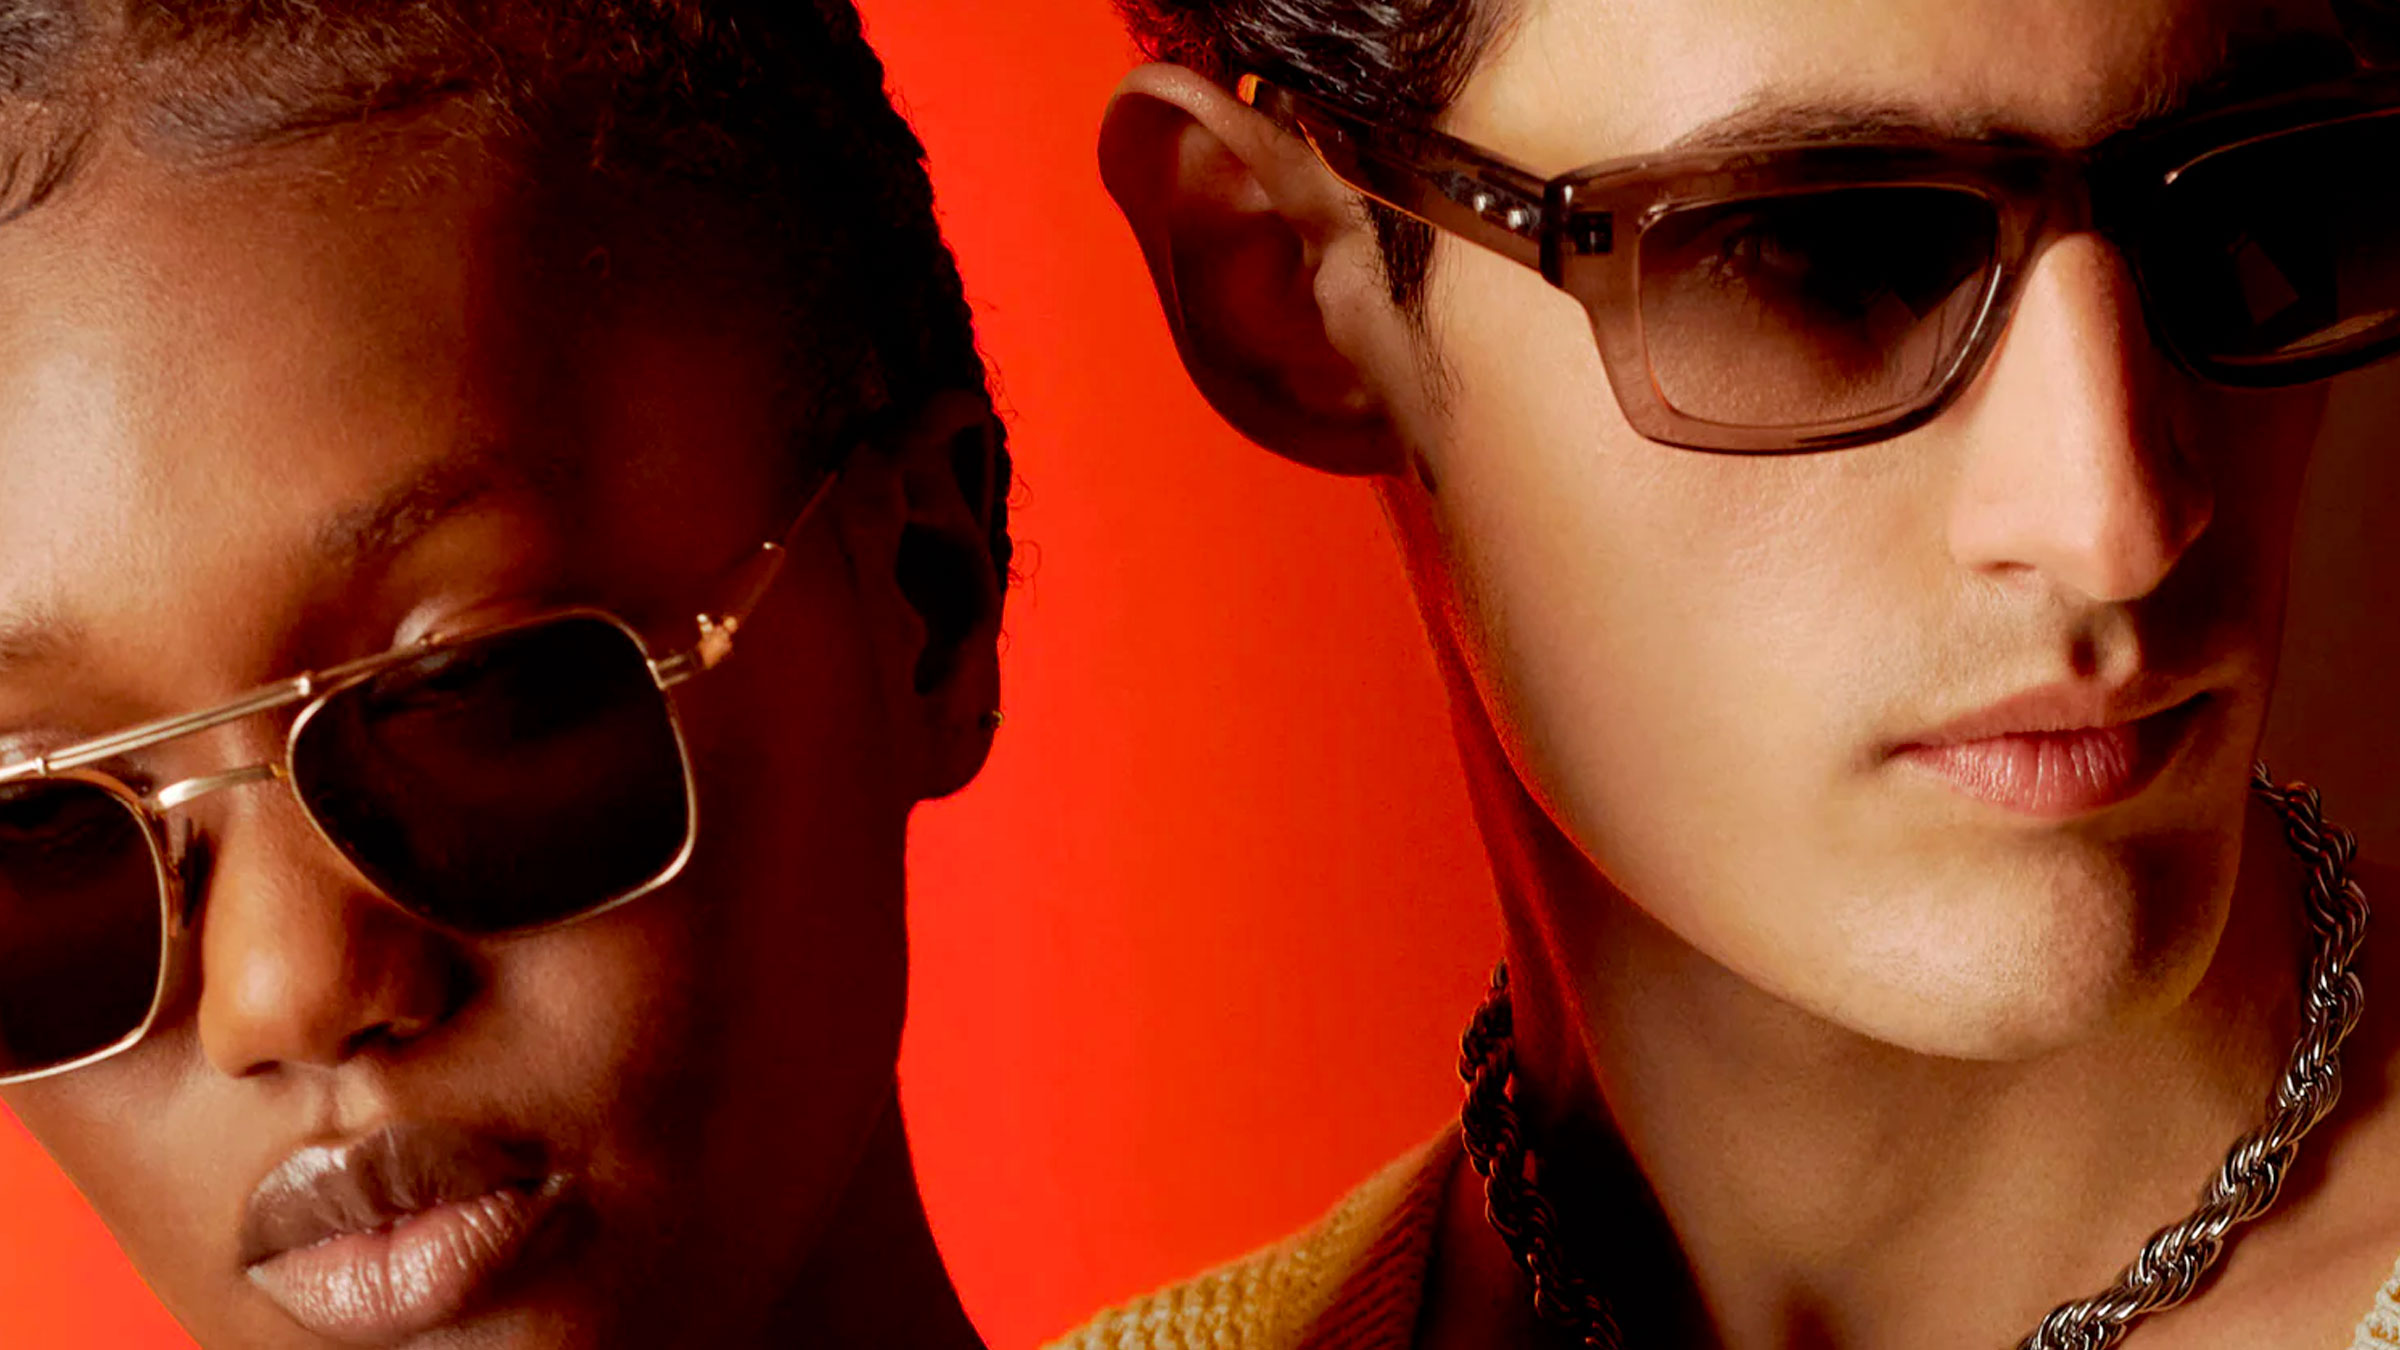 akoni eyewear is taking the fashion industry by storm